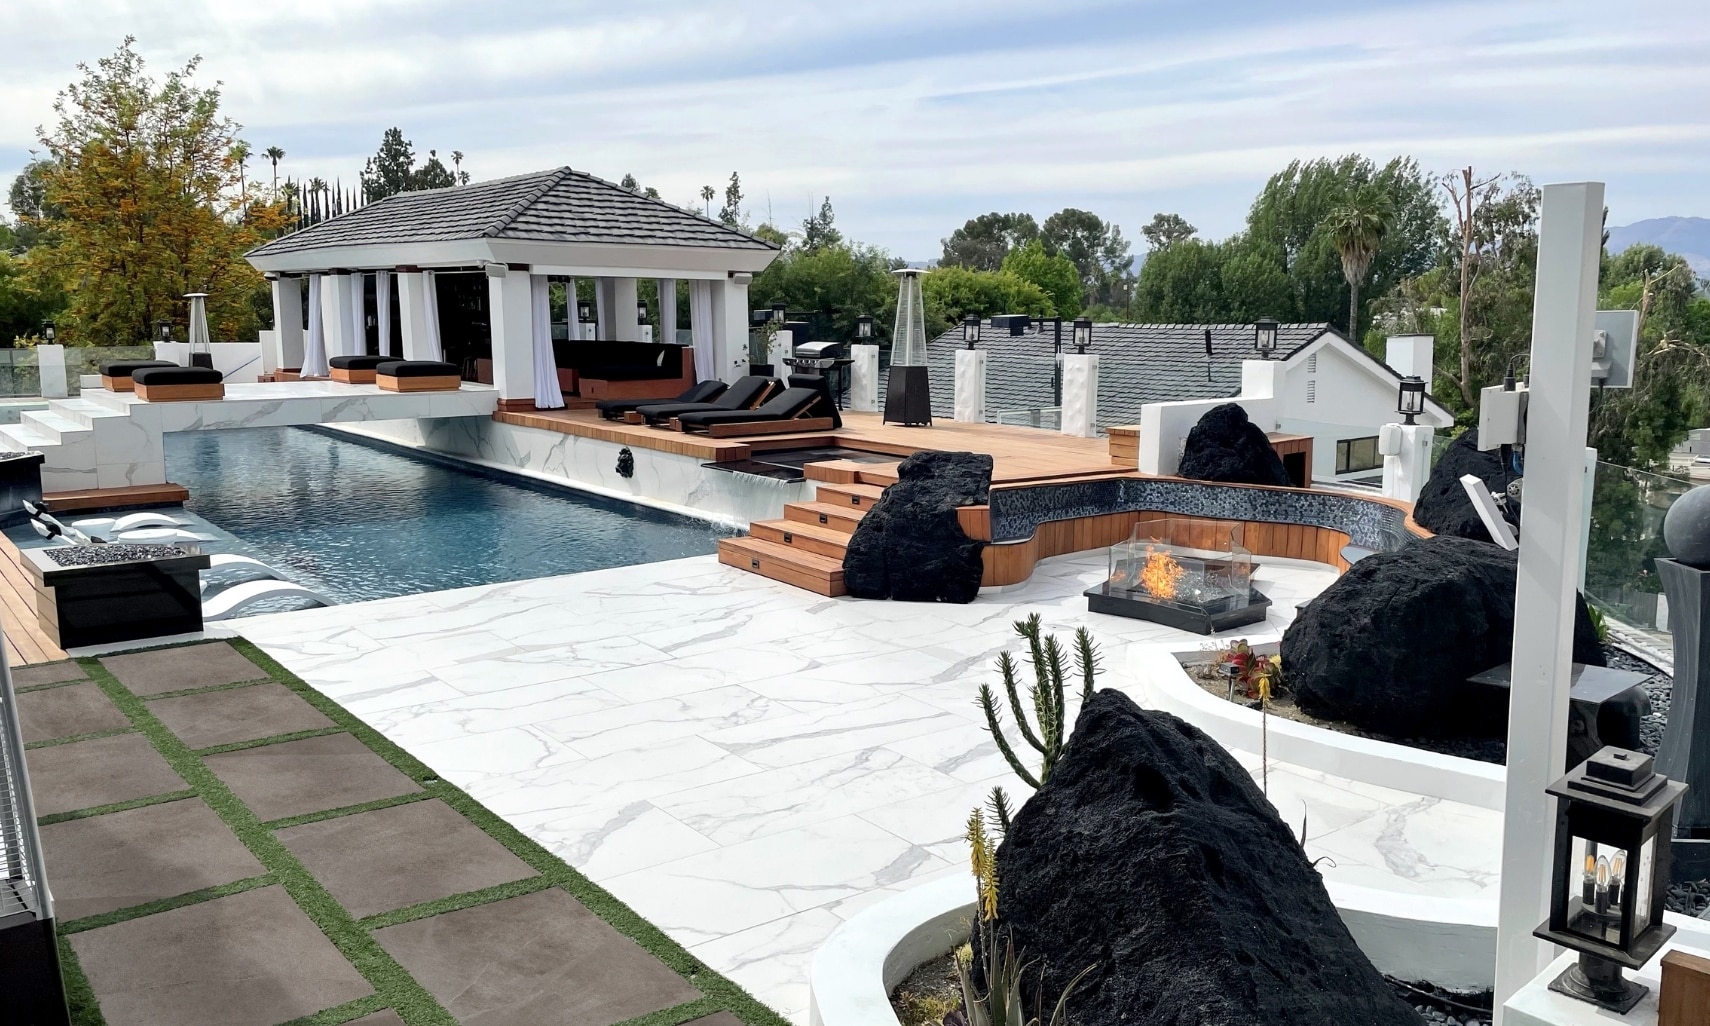 Jason Derulo’s backyard with pool deck & bridge made of white & gray porcelain tile that looks like marble, and wood deck with lounge chairs.